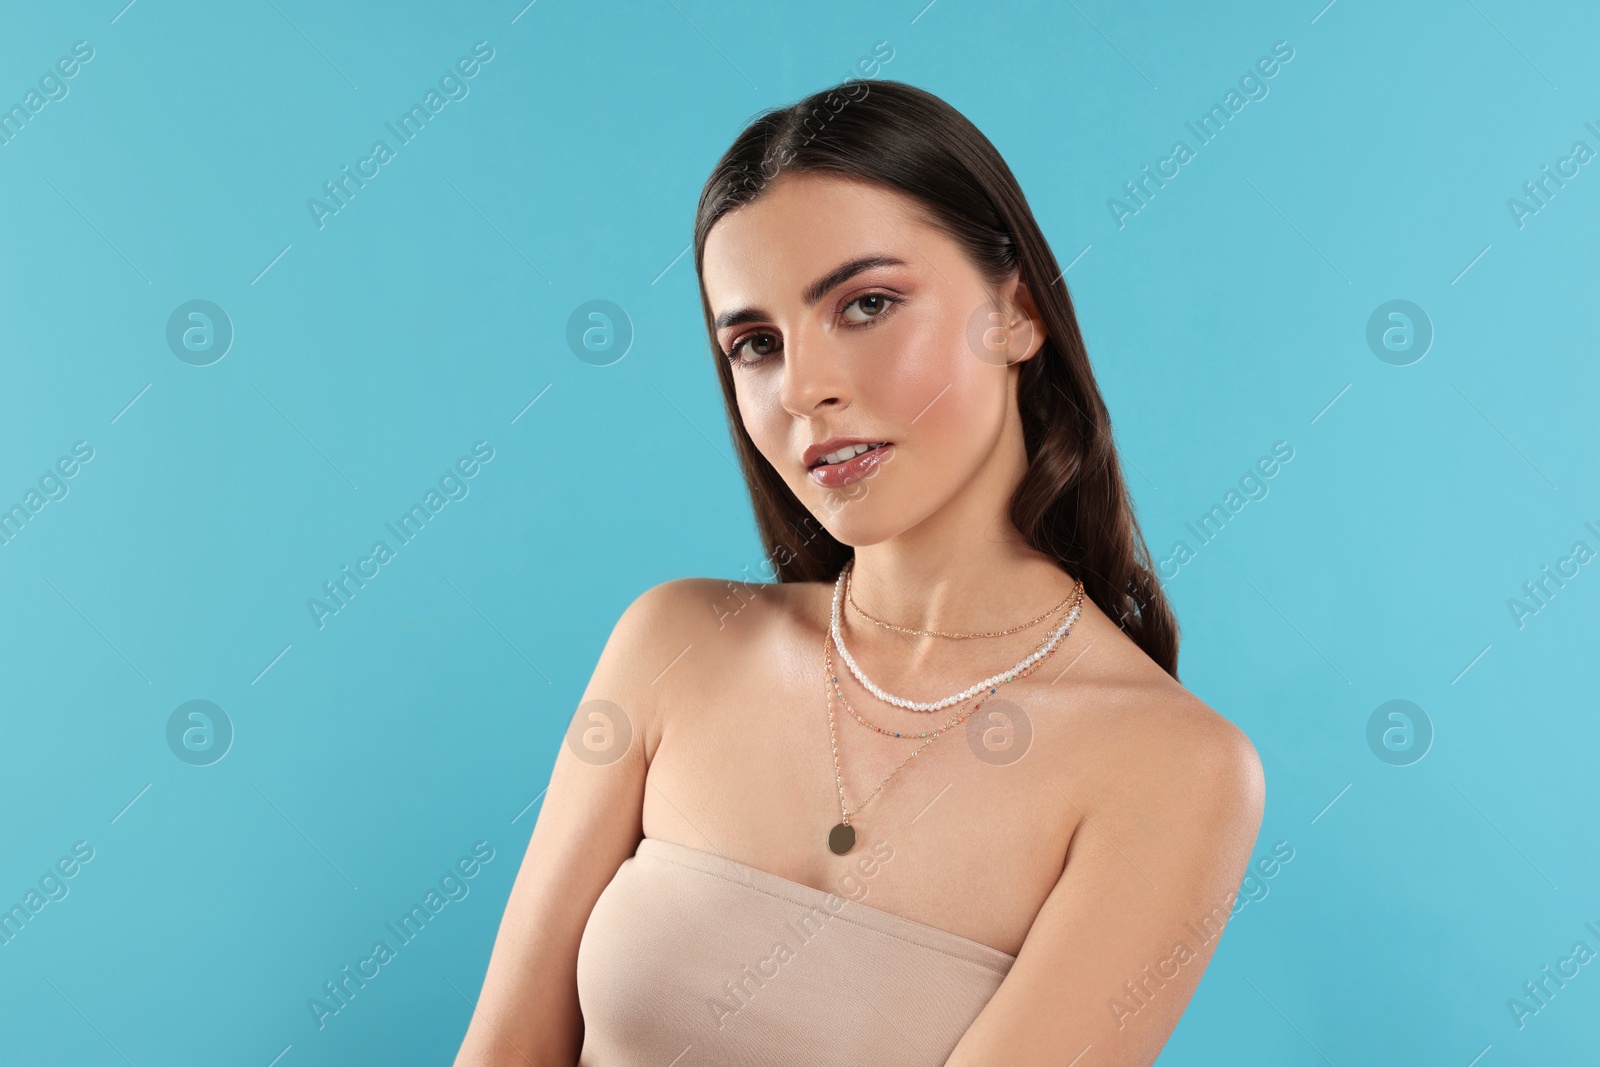 Photo of Beautiful woman with elegant necklaces on light blue background